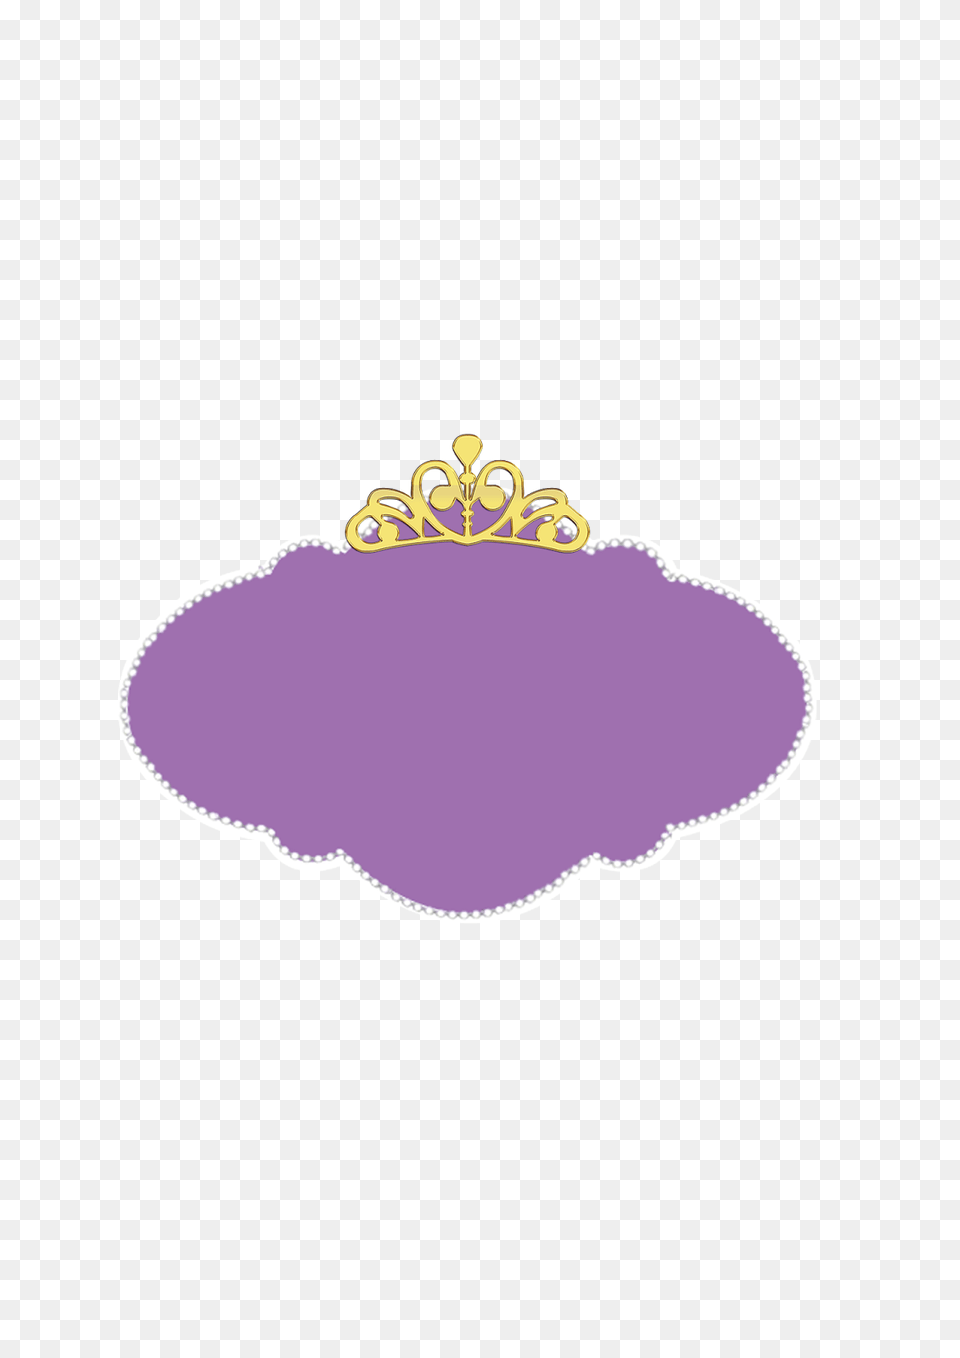 Sofia The First Crown Clipart Png Image